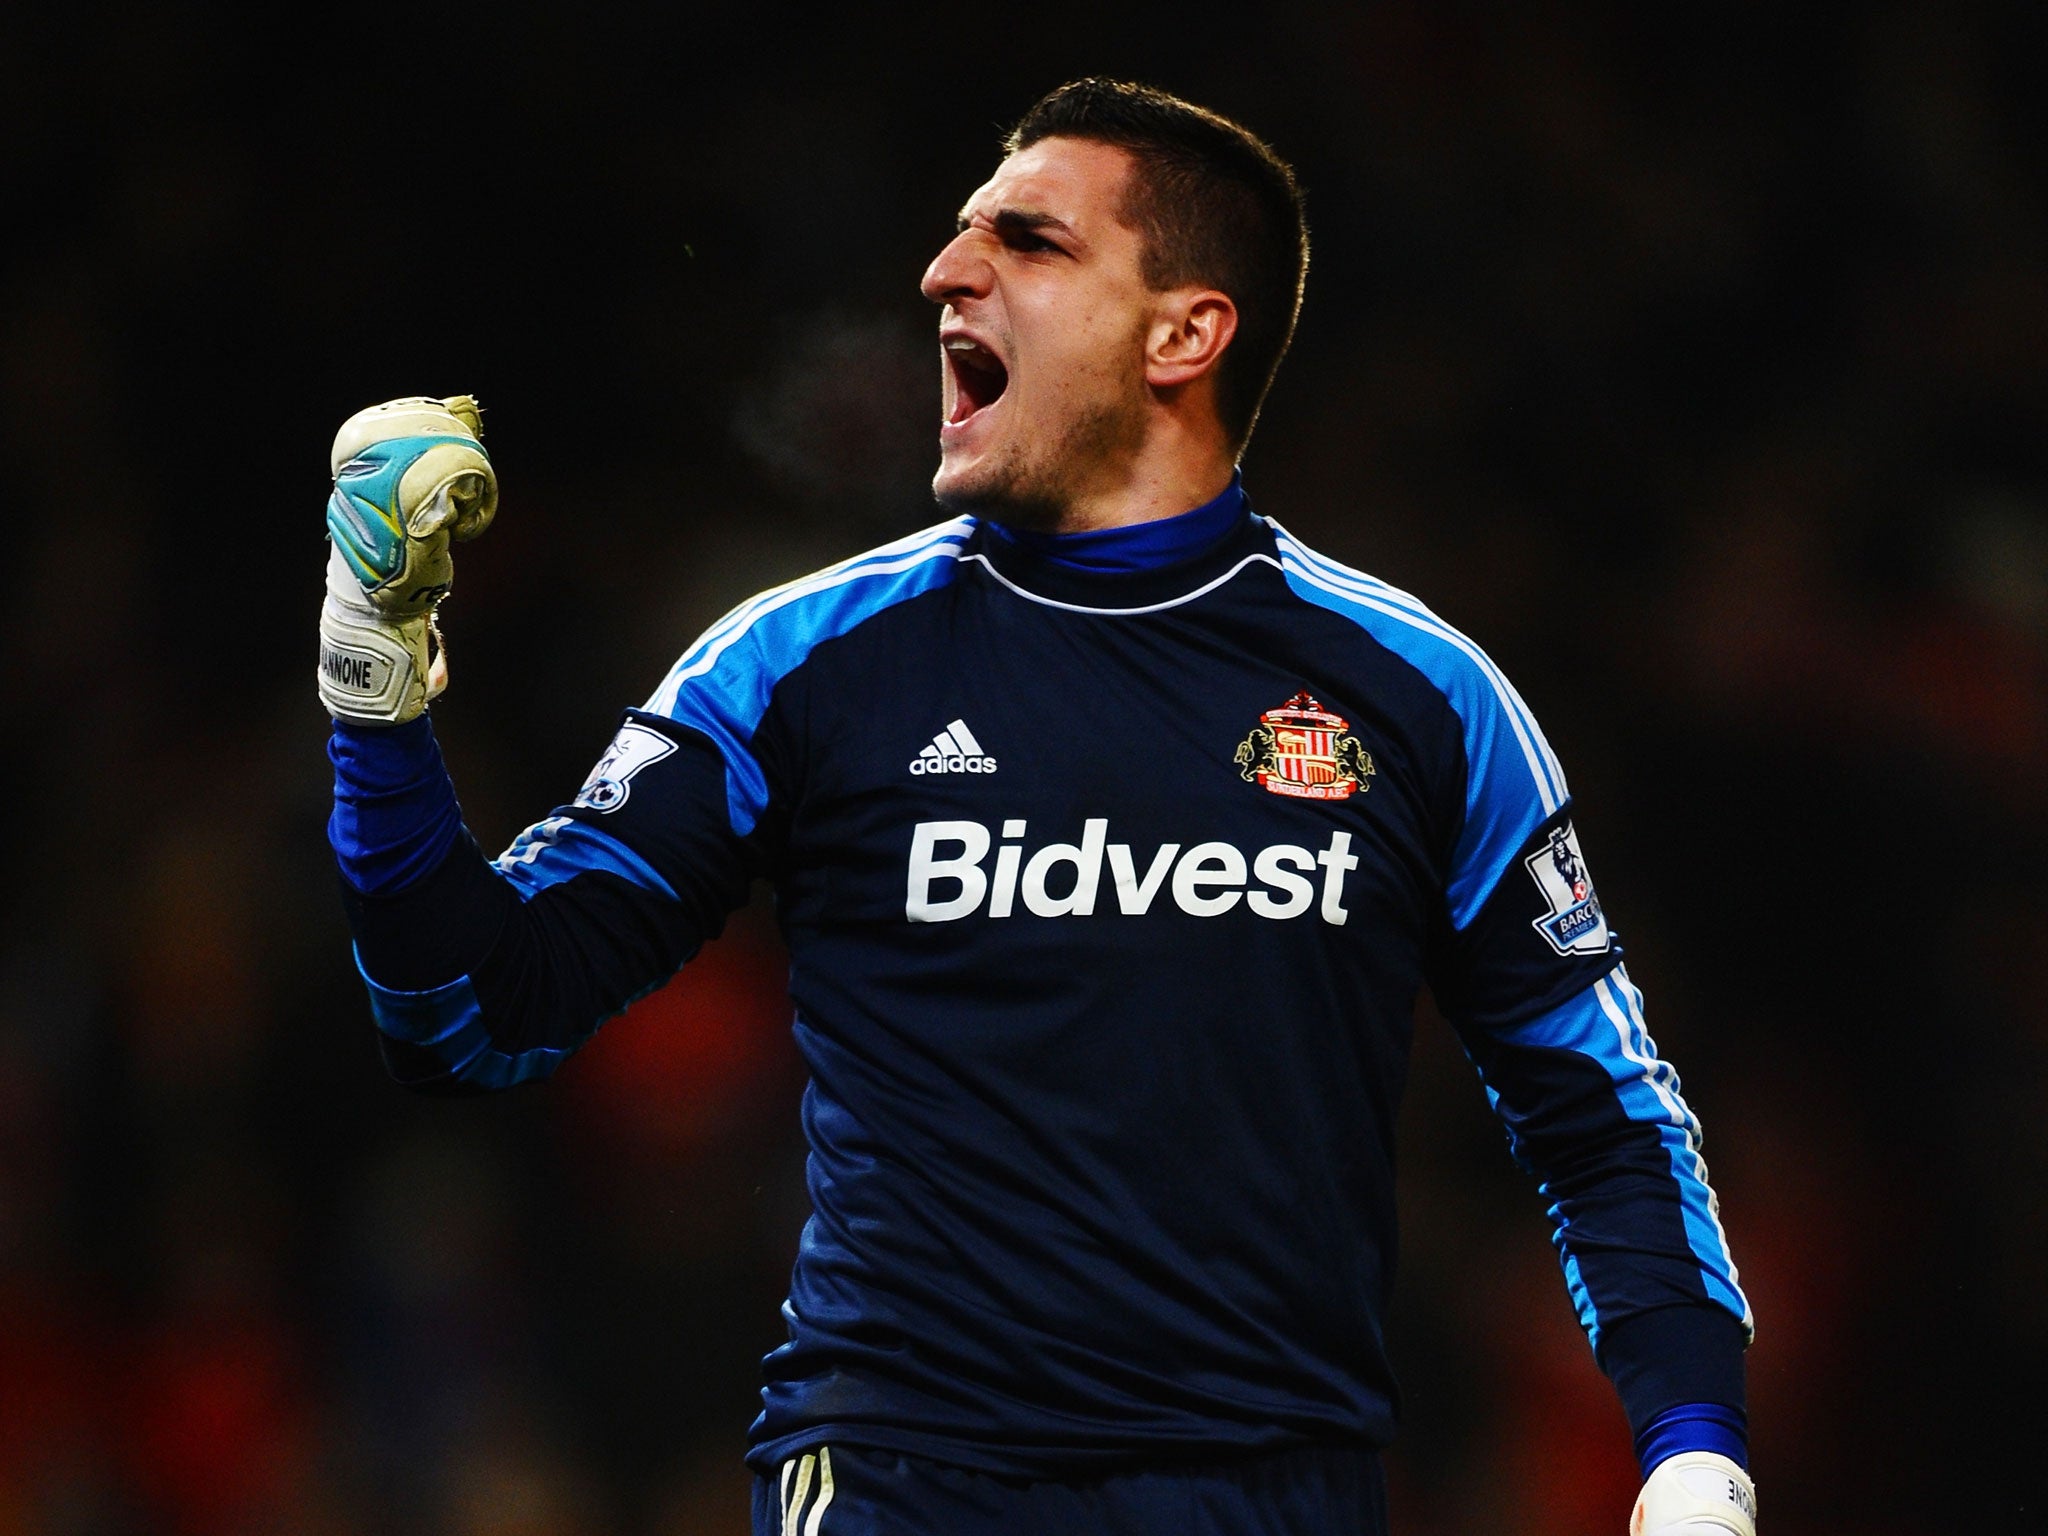 Sunderland keeper Vito Mannone celebrates making a save during Wednesday's shoot out